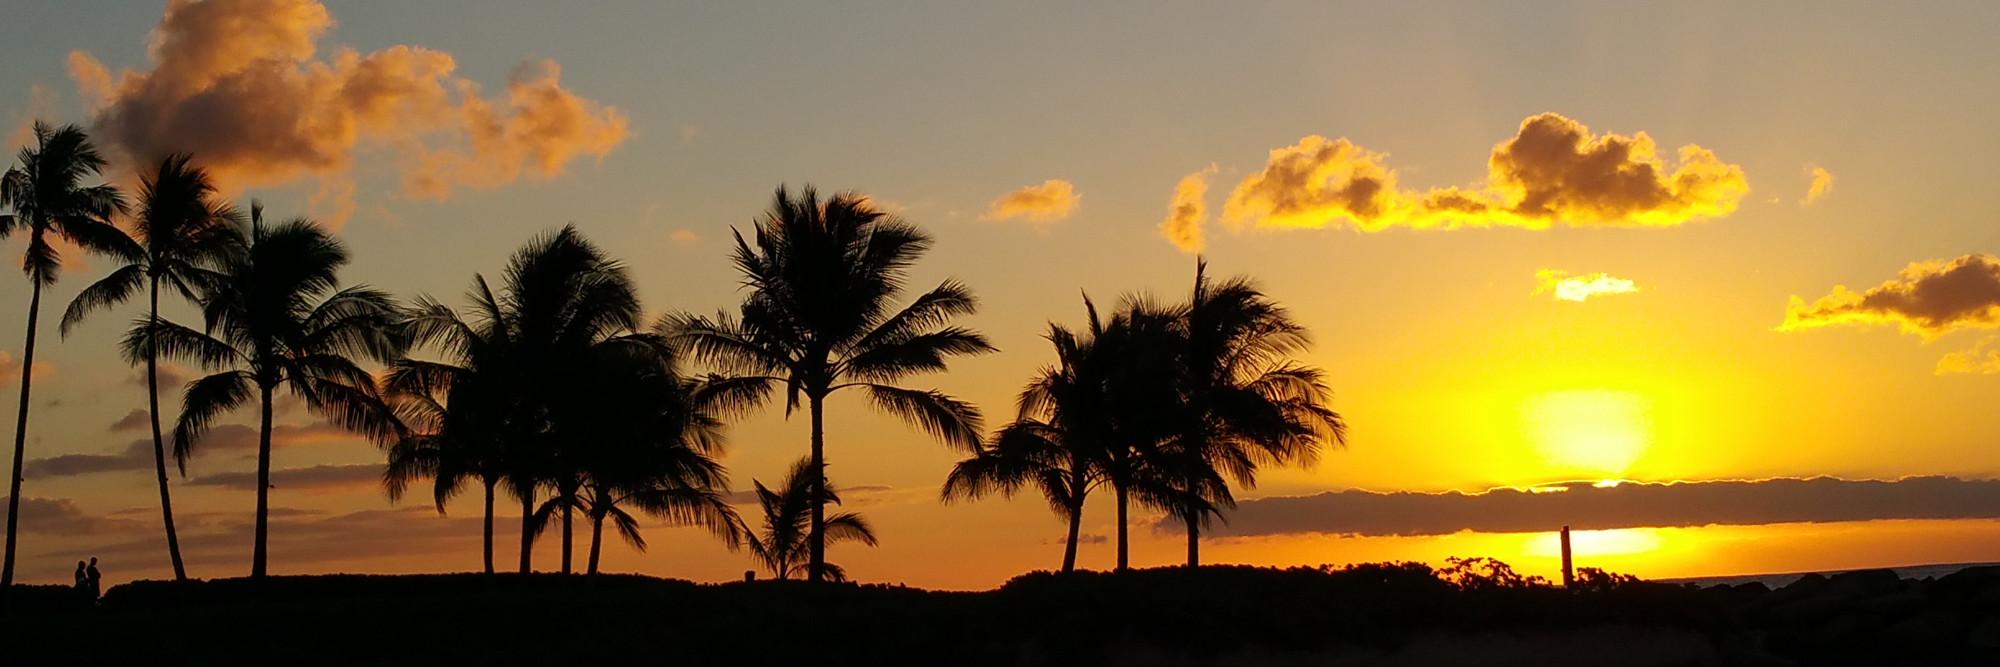 Sunset at a beach with palm trees